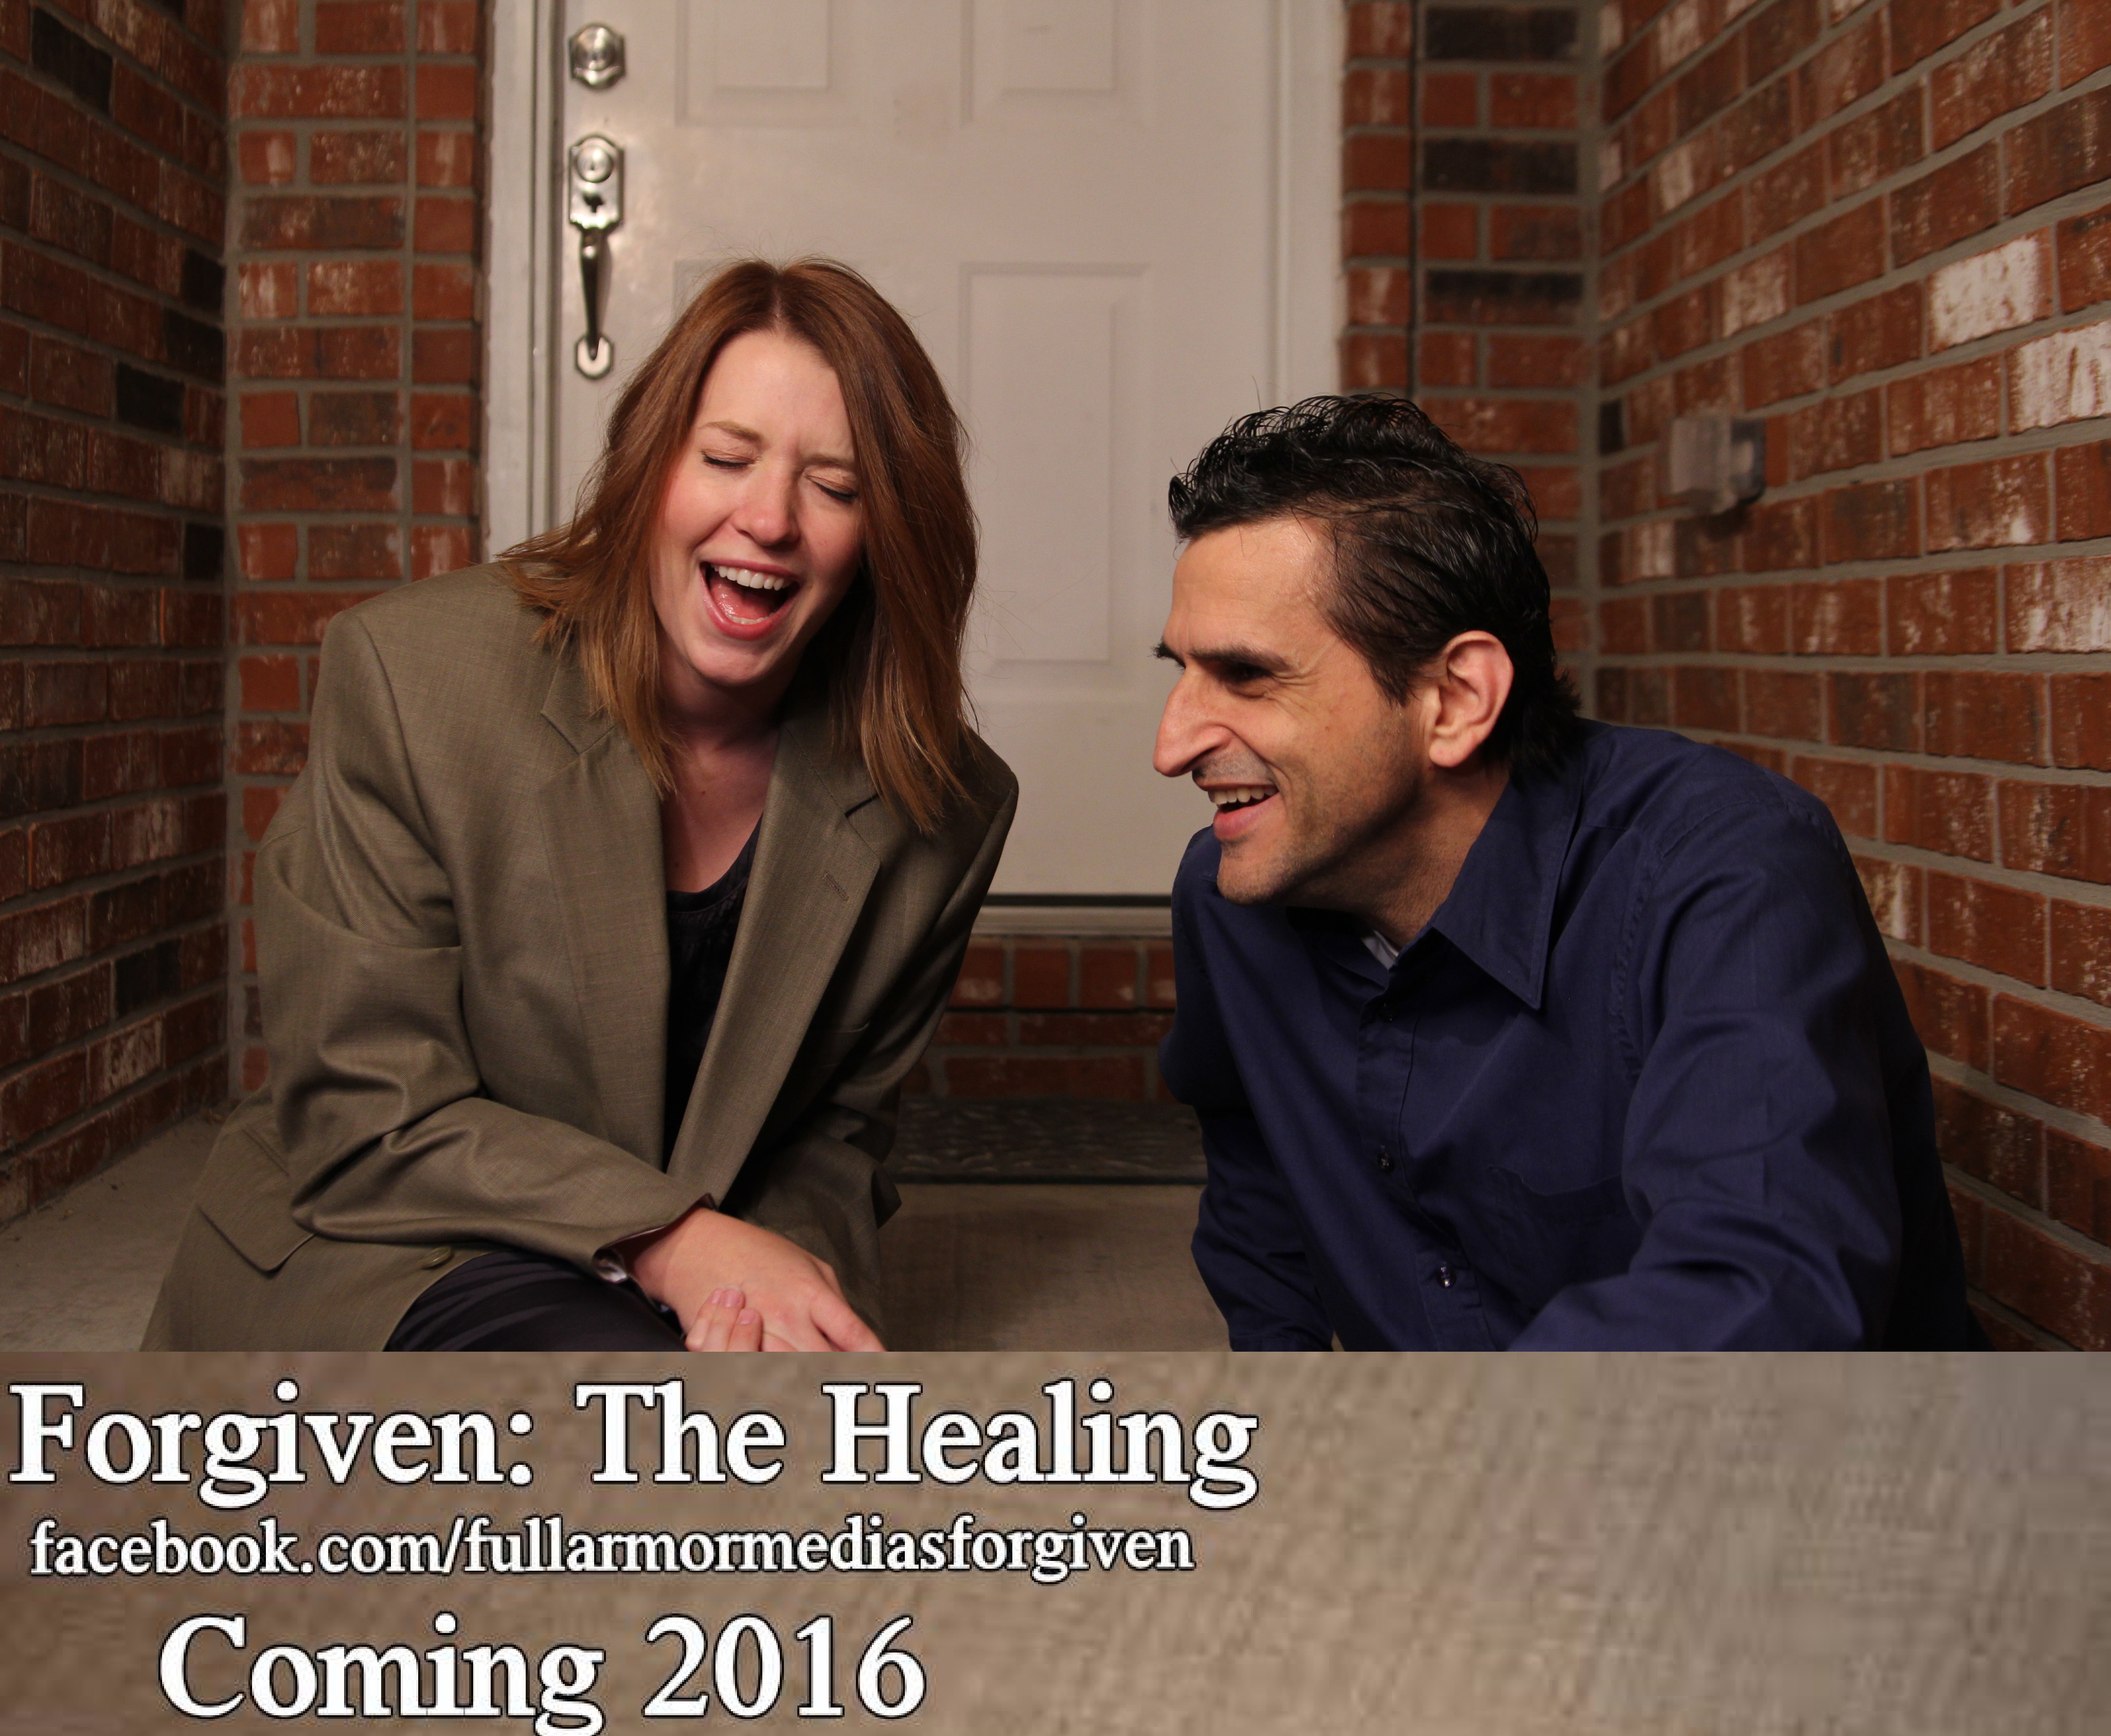 A promotional photo from Forgiven: The Healing Sara and Peter